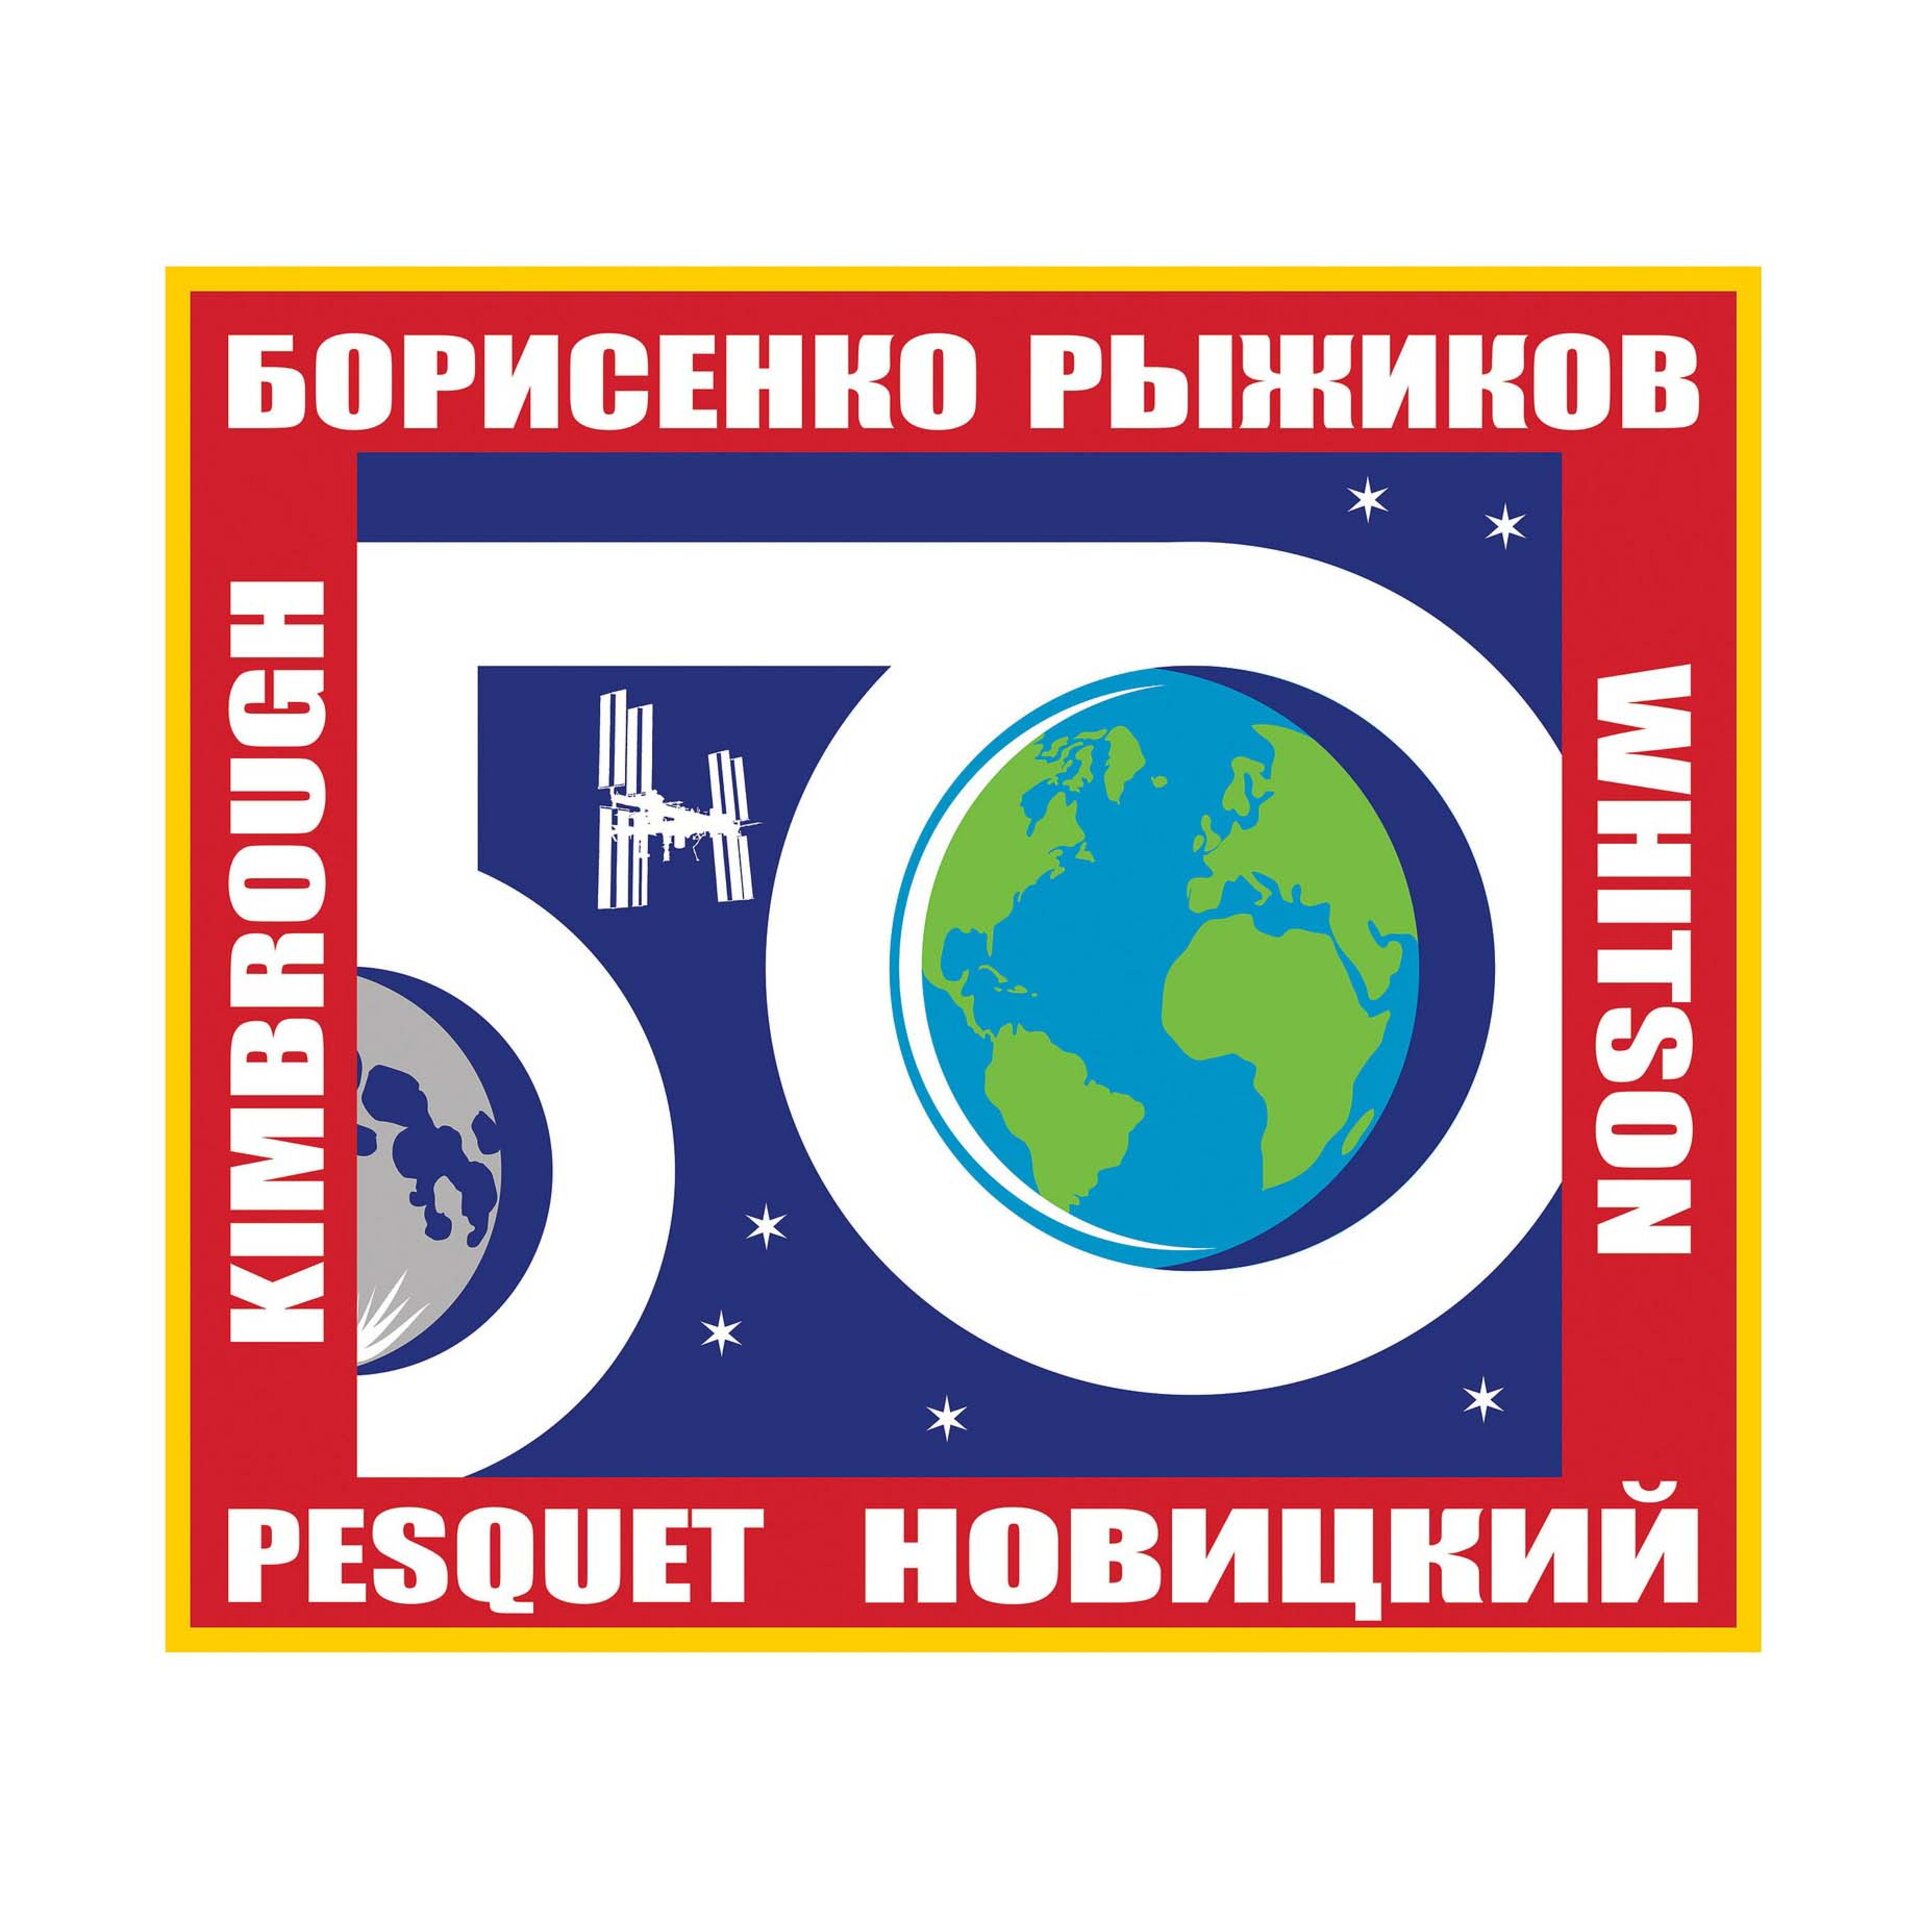 ISS Expedition 50 patch, 2016